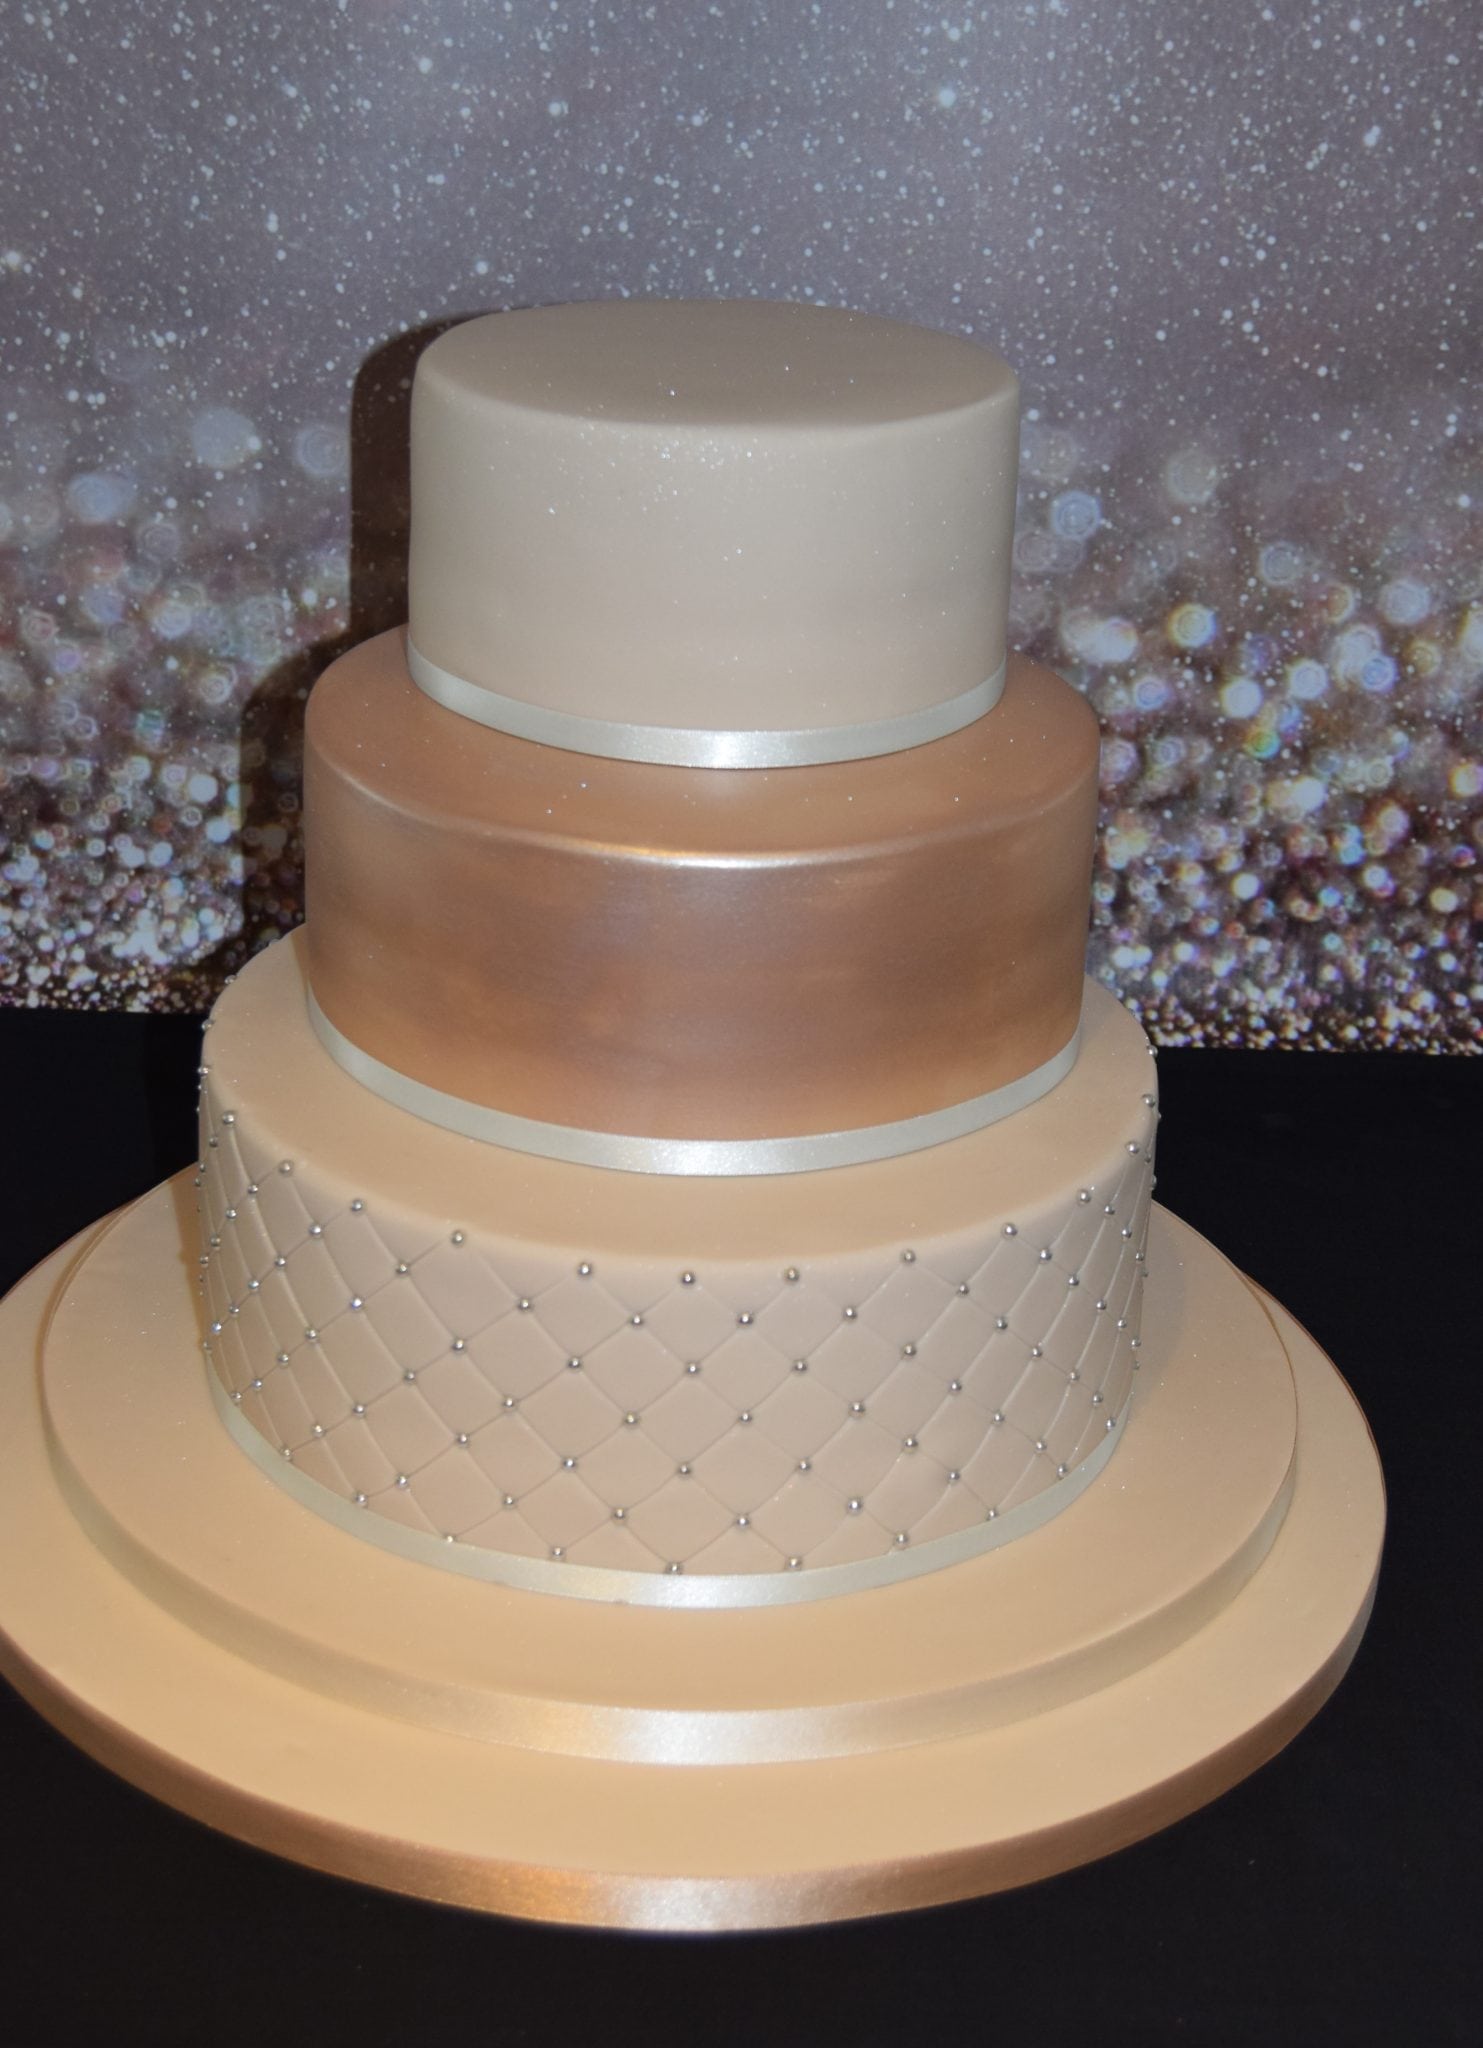 champagne ws060 2 truly designer cakes sswg